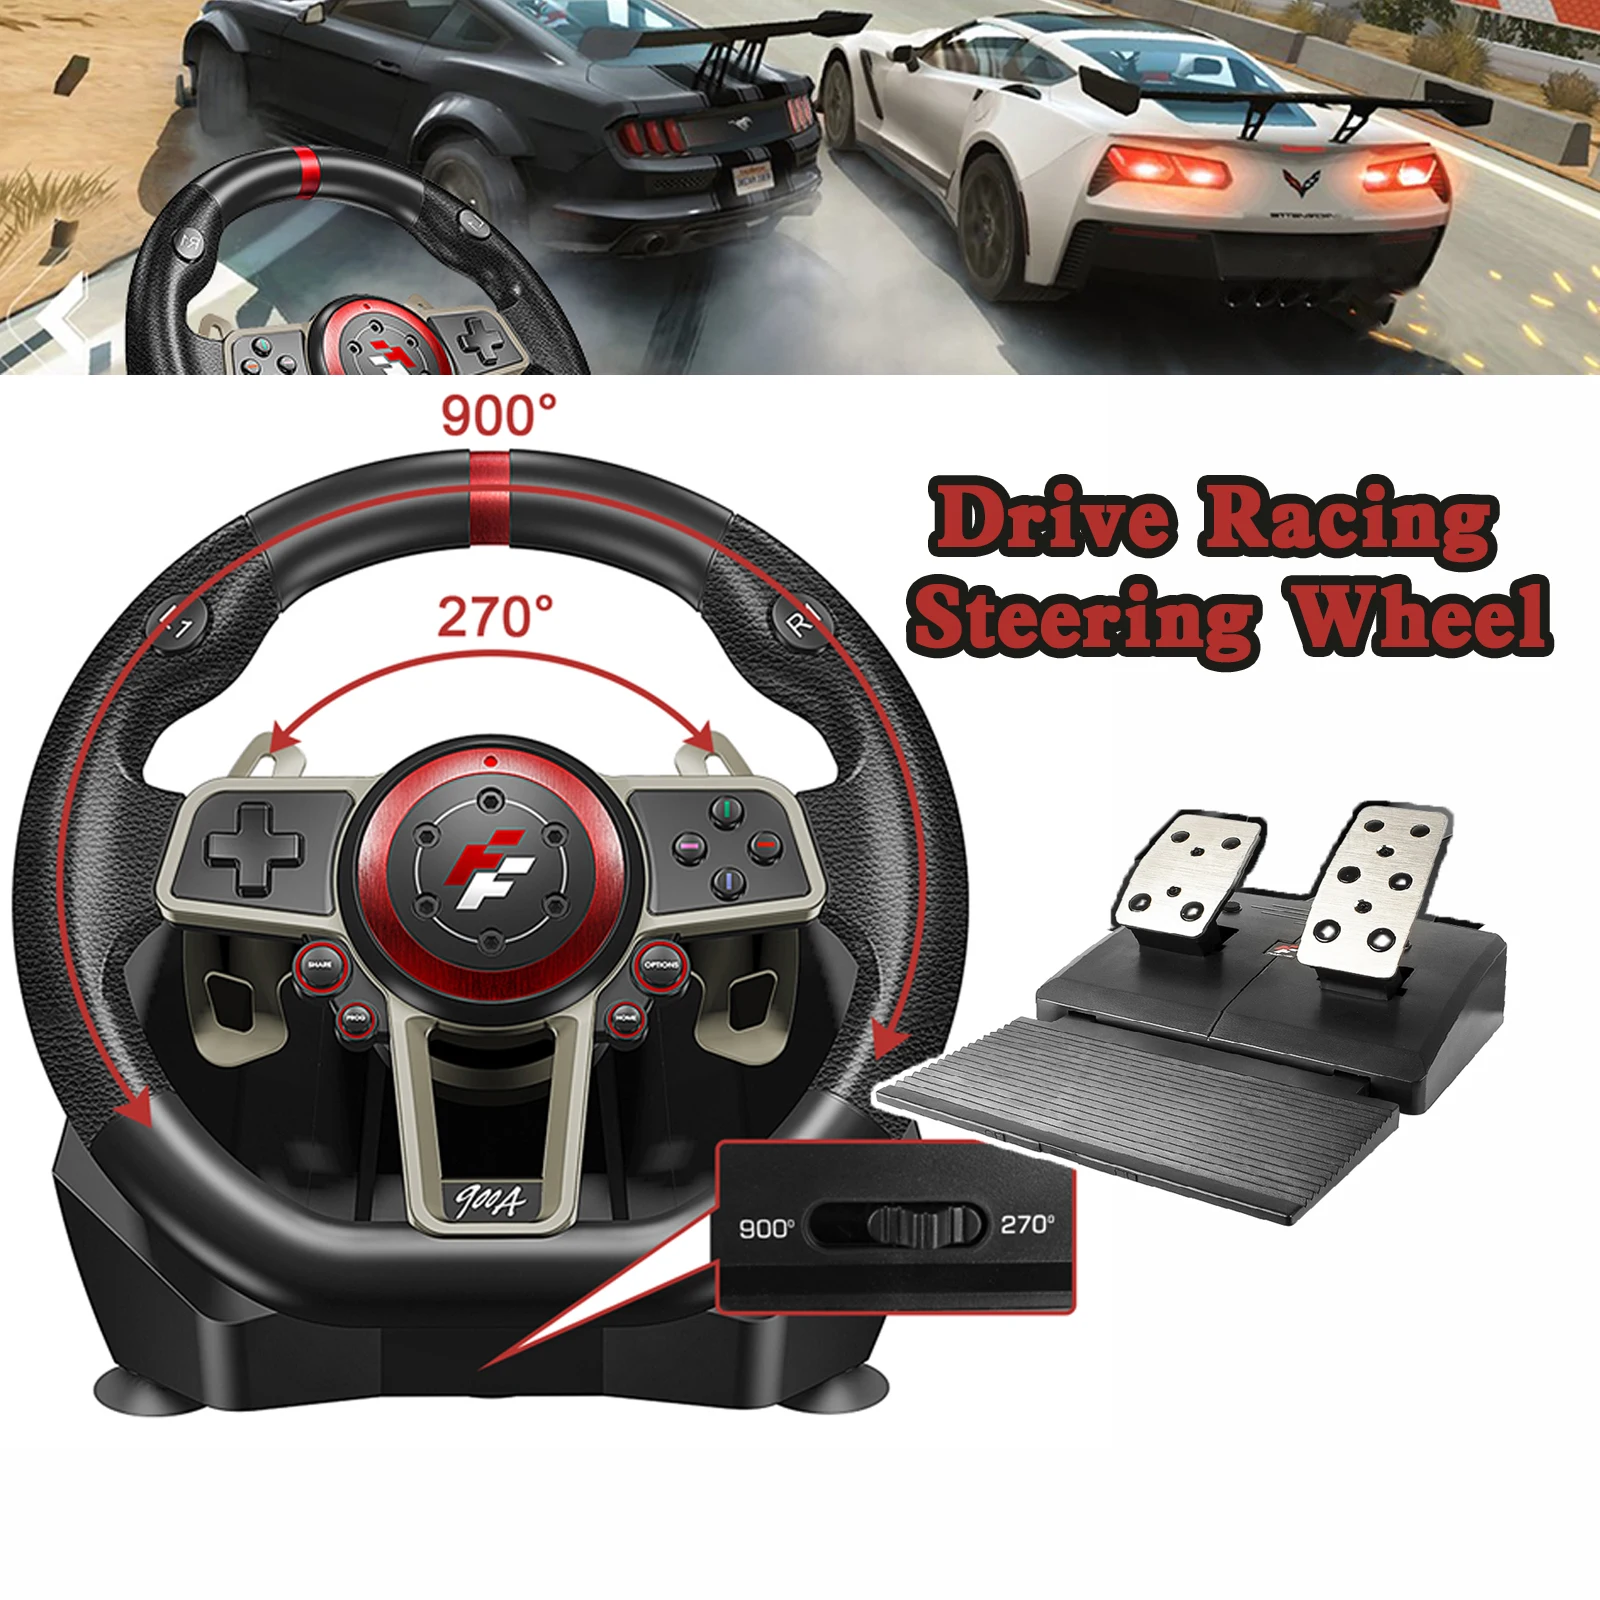 Gaming Racing Wheel With Responsive Pedals for PC /PS3/PS4/Xbox One/360/Nintendo Switch Accessories Vibration Simracing Volante